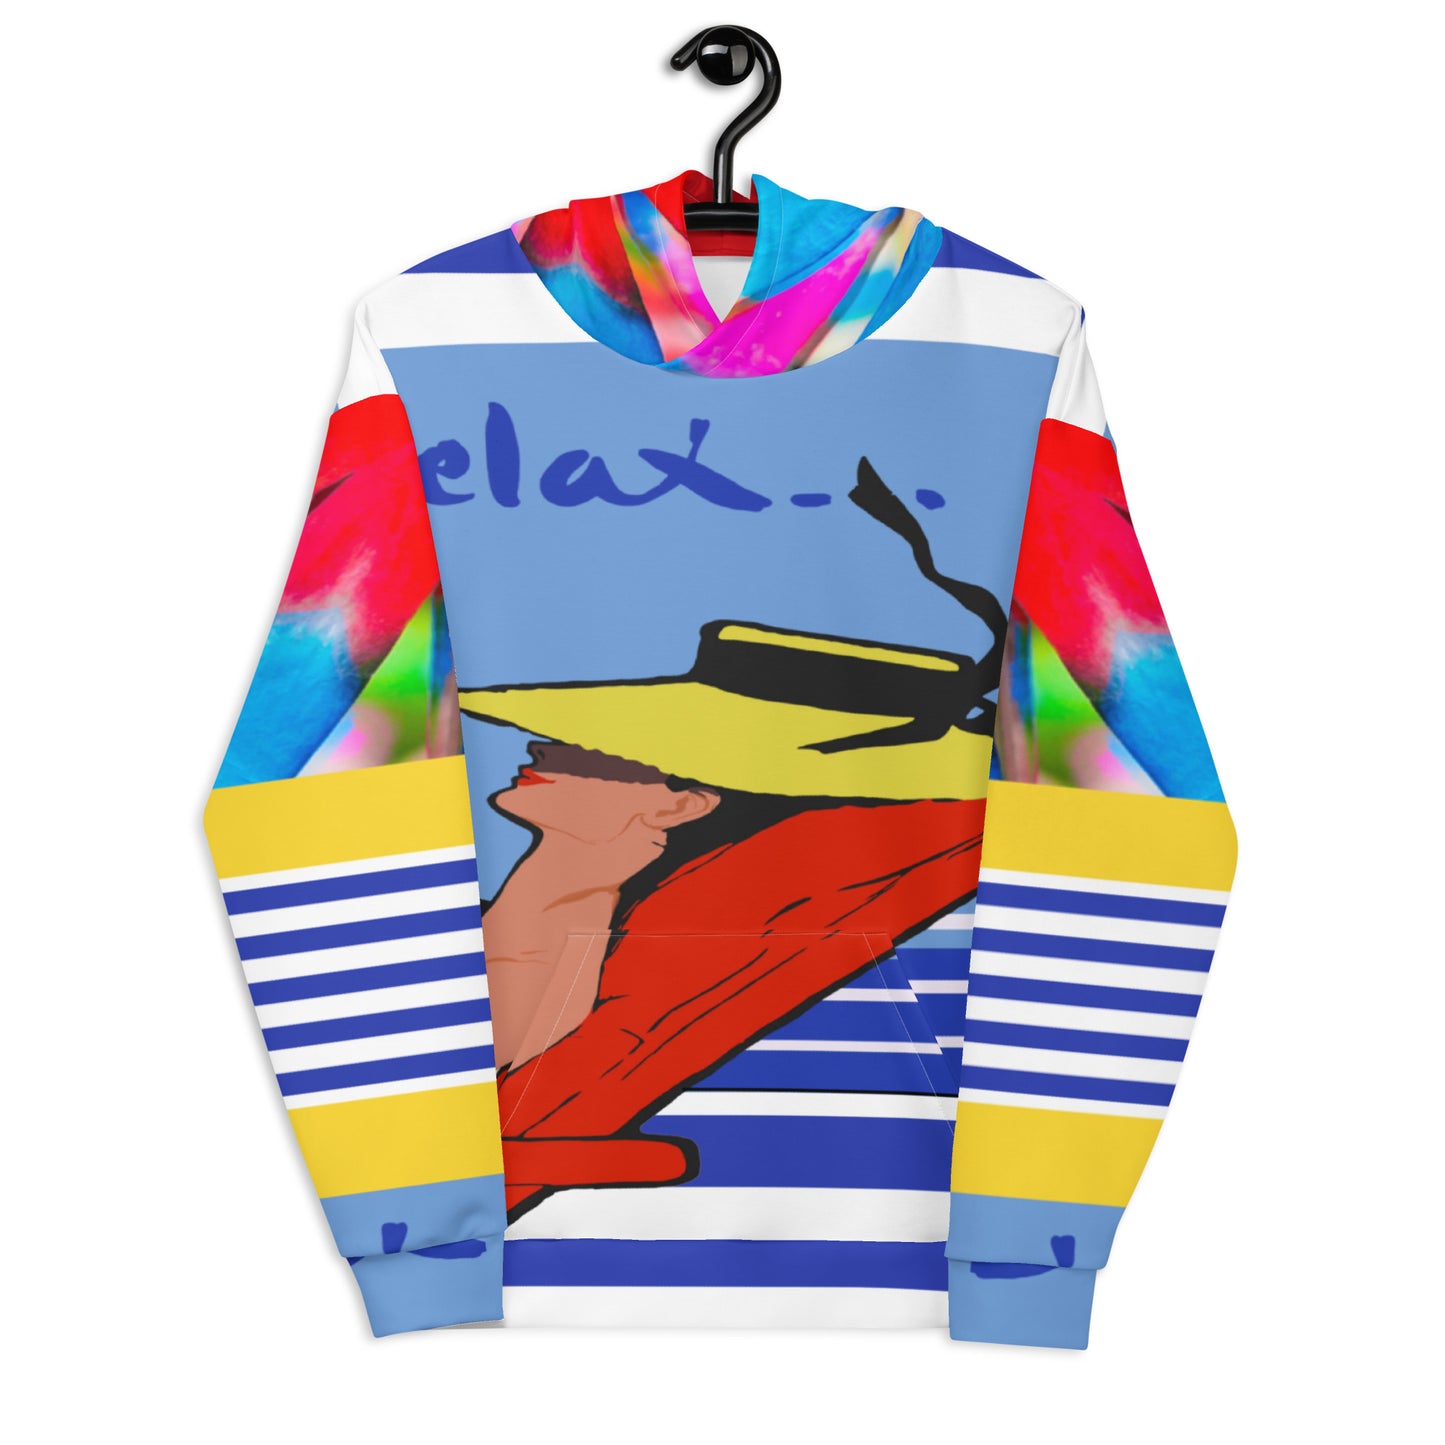 Relax Go To IT! Vacation-Themed Unisex Hoody